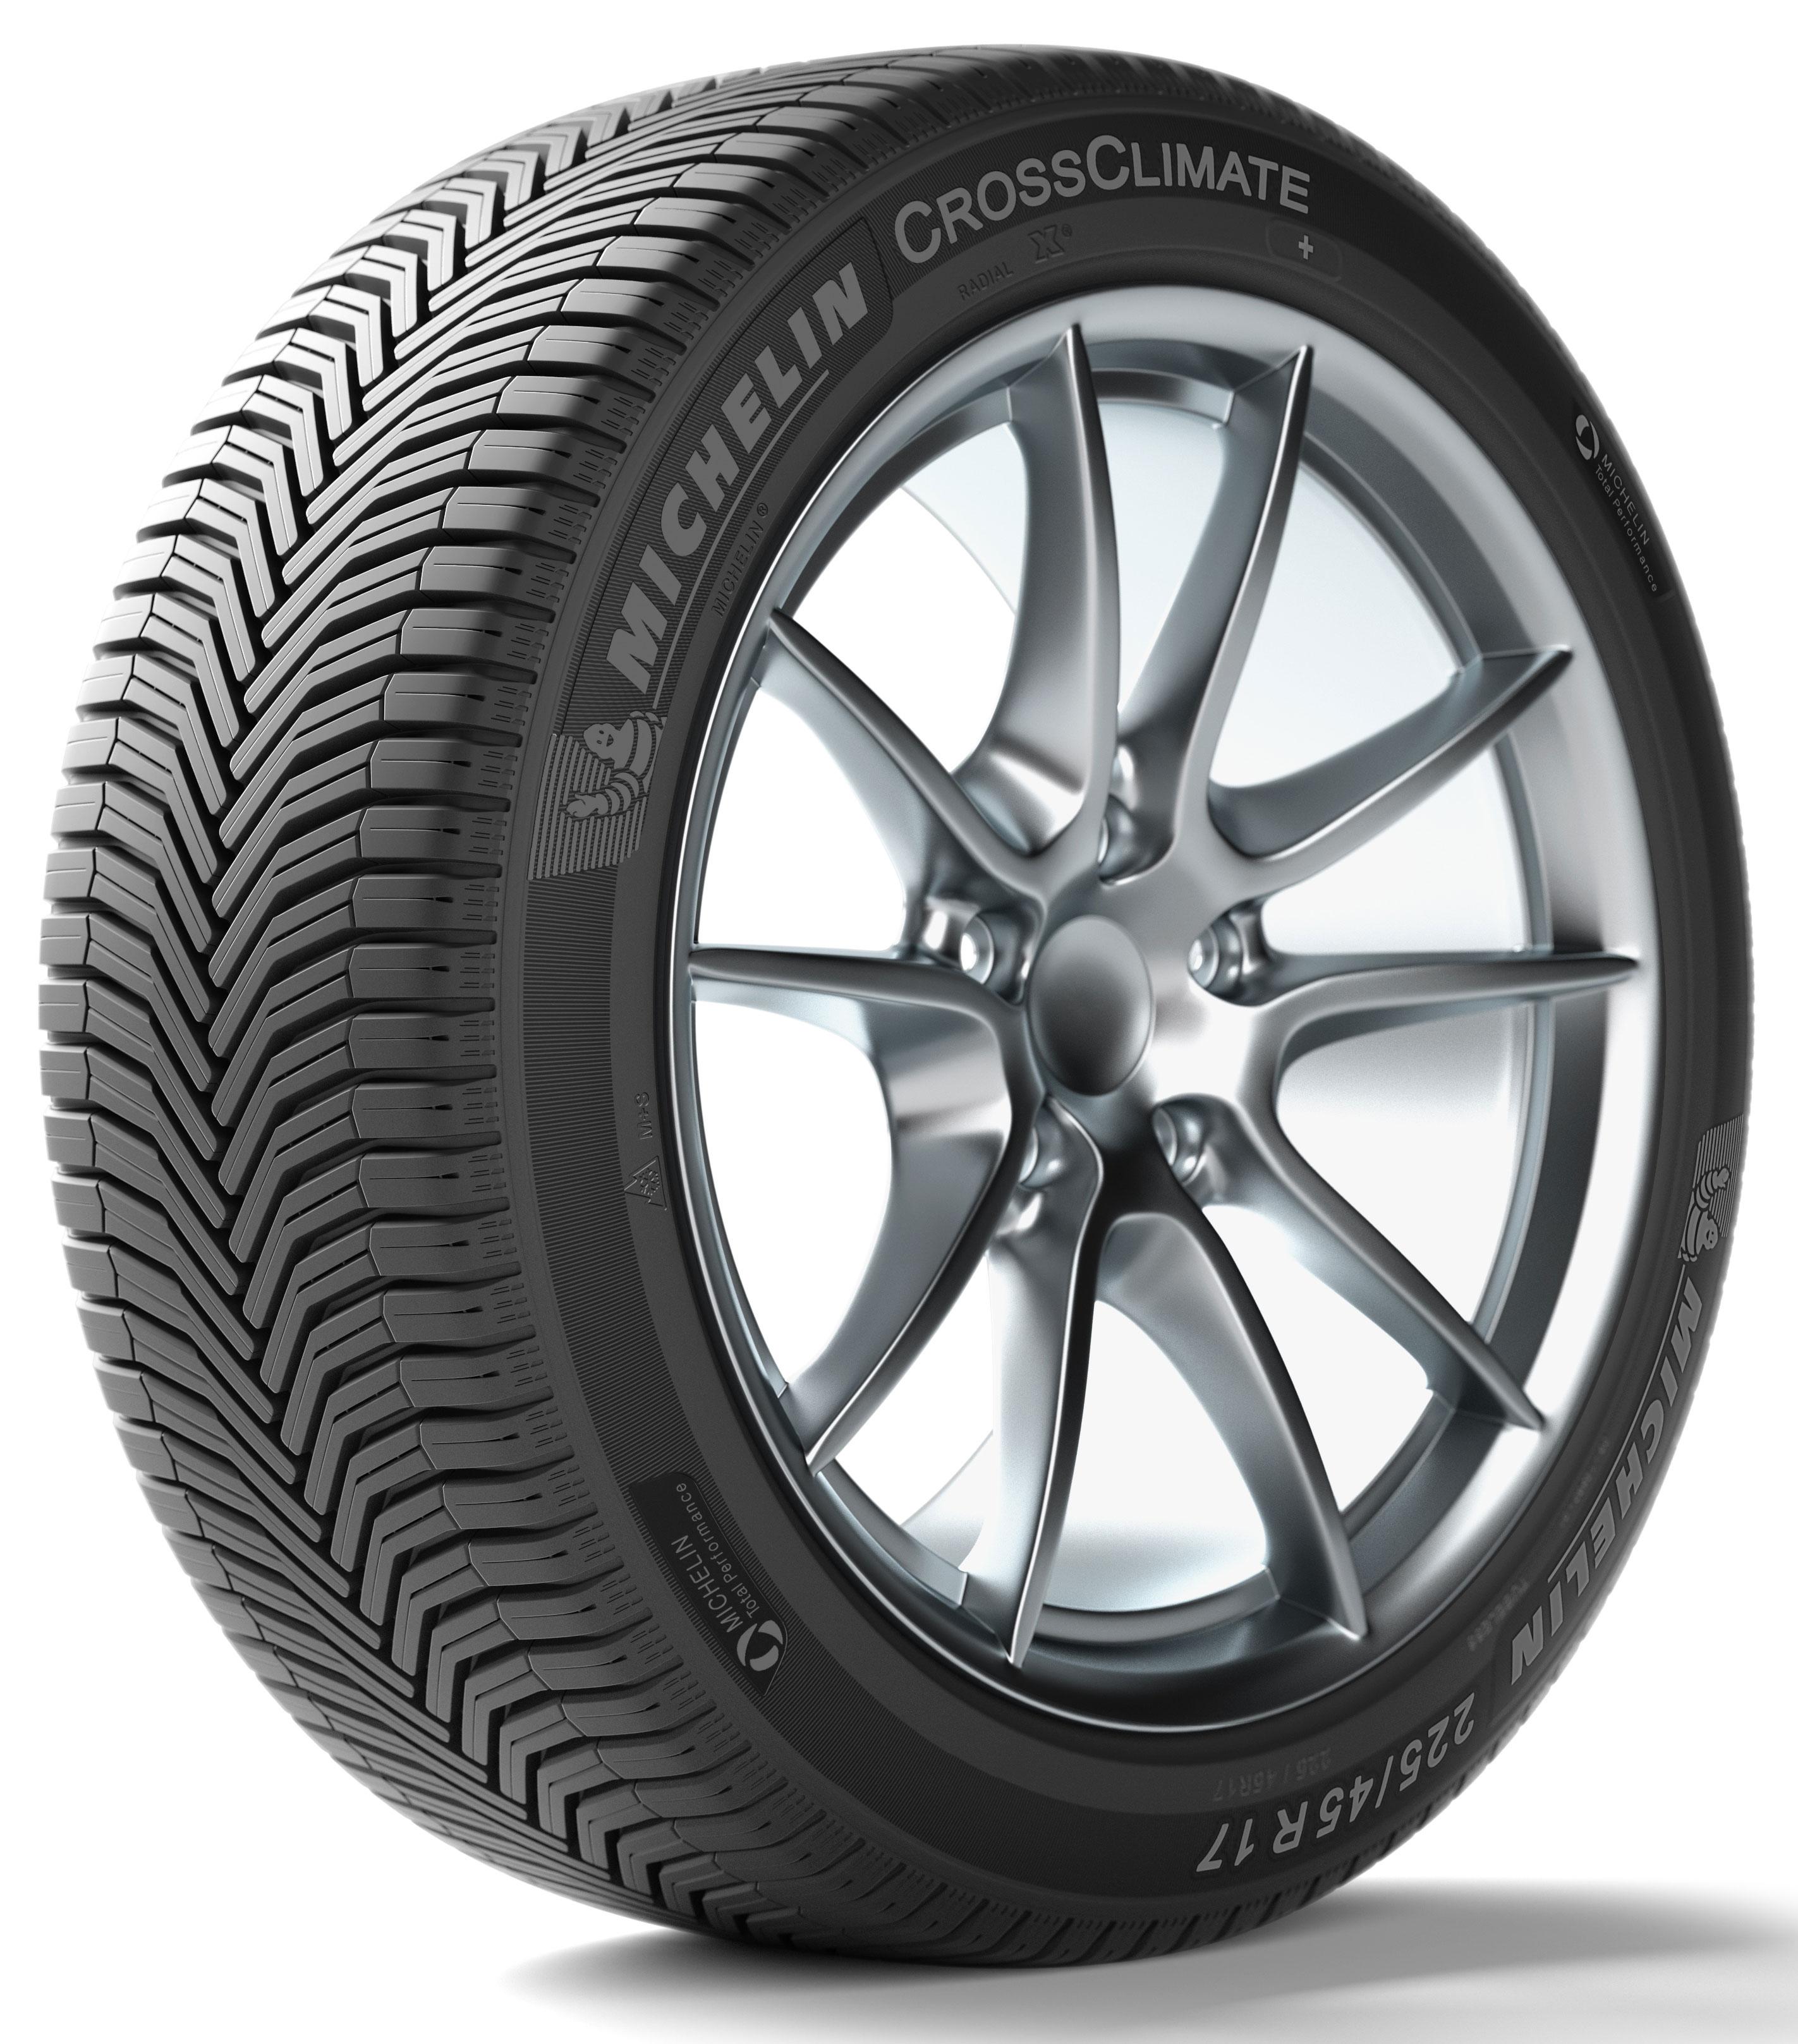 Anvelope all seasons MICHELIN CrossClimate+ M+S XL 175/65 R14 86H